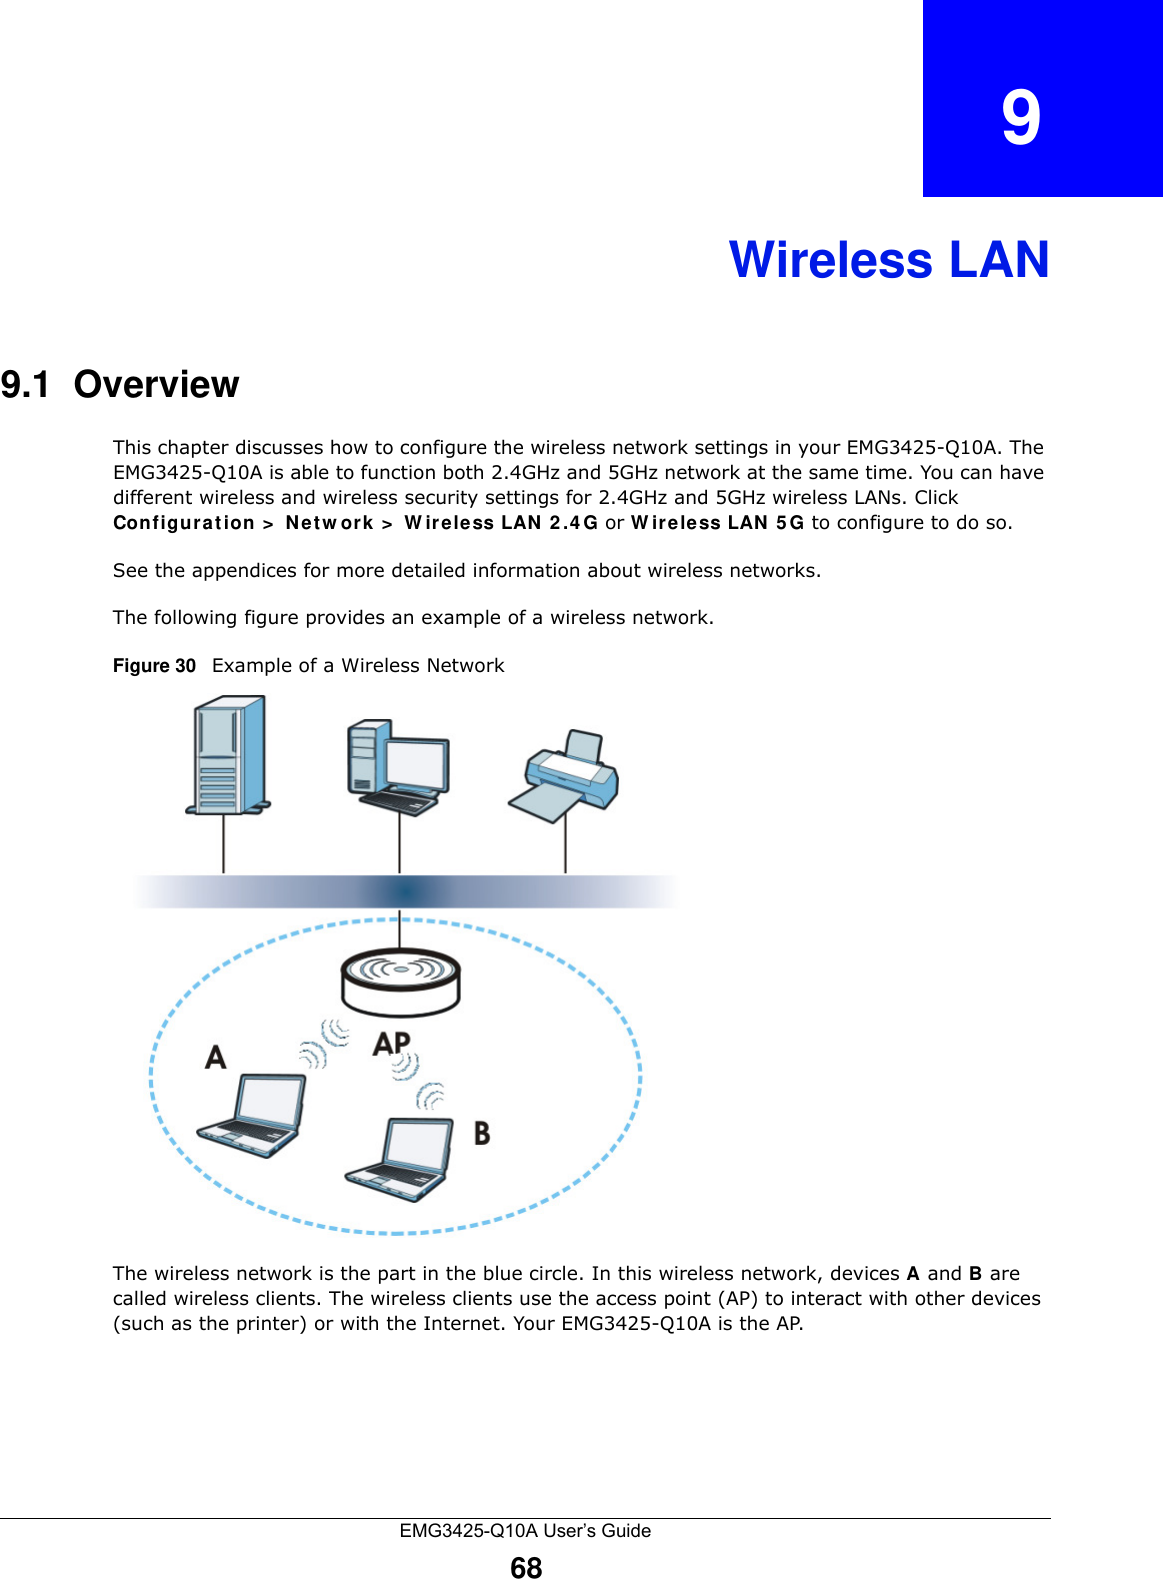 EMG3425-Q10A User’s Guide68CHAPTER   9Wireless LAN9.1  OverviewThis chapter discusses how to configure the wireless network settings in your EMG3425-Q10A. The EMG3425-Q10A is able to function both 2.4GHz and 5GHz network at the same time. You can have different wireless and wireless security settings for 2.4GHz and 5GHz wireless LANs. Click Configura t ion &gt;  Ne t w ork &gt;  W ir e less LAN  2 .4 G or W ireless LAN  5 G to configure to do so.See the appendices for more detailed information about wireless networks.The following figure provides an example of a wireless network.Figure 30   Example of a Wireless NetworkThe wireless network is the part in the blue circle. In this wireless network, devices A and B are called wireless clients. The wireless clients use the access point (AP) to interact with other devices (such as the printer) or with the Internet. Your EMG3425-Q10A is the AP.